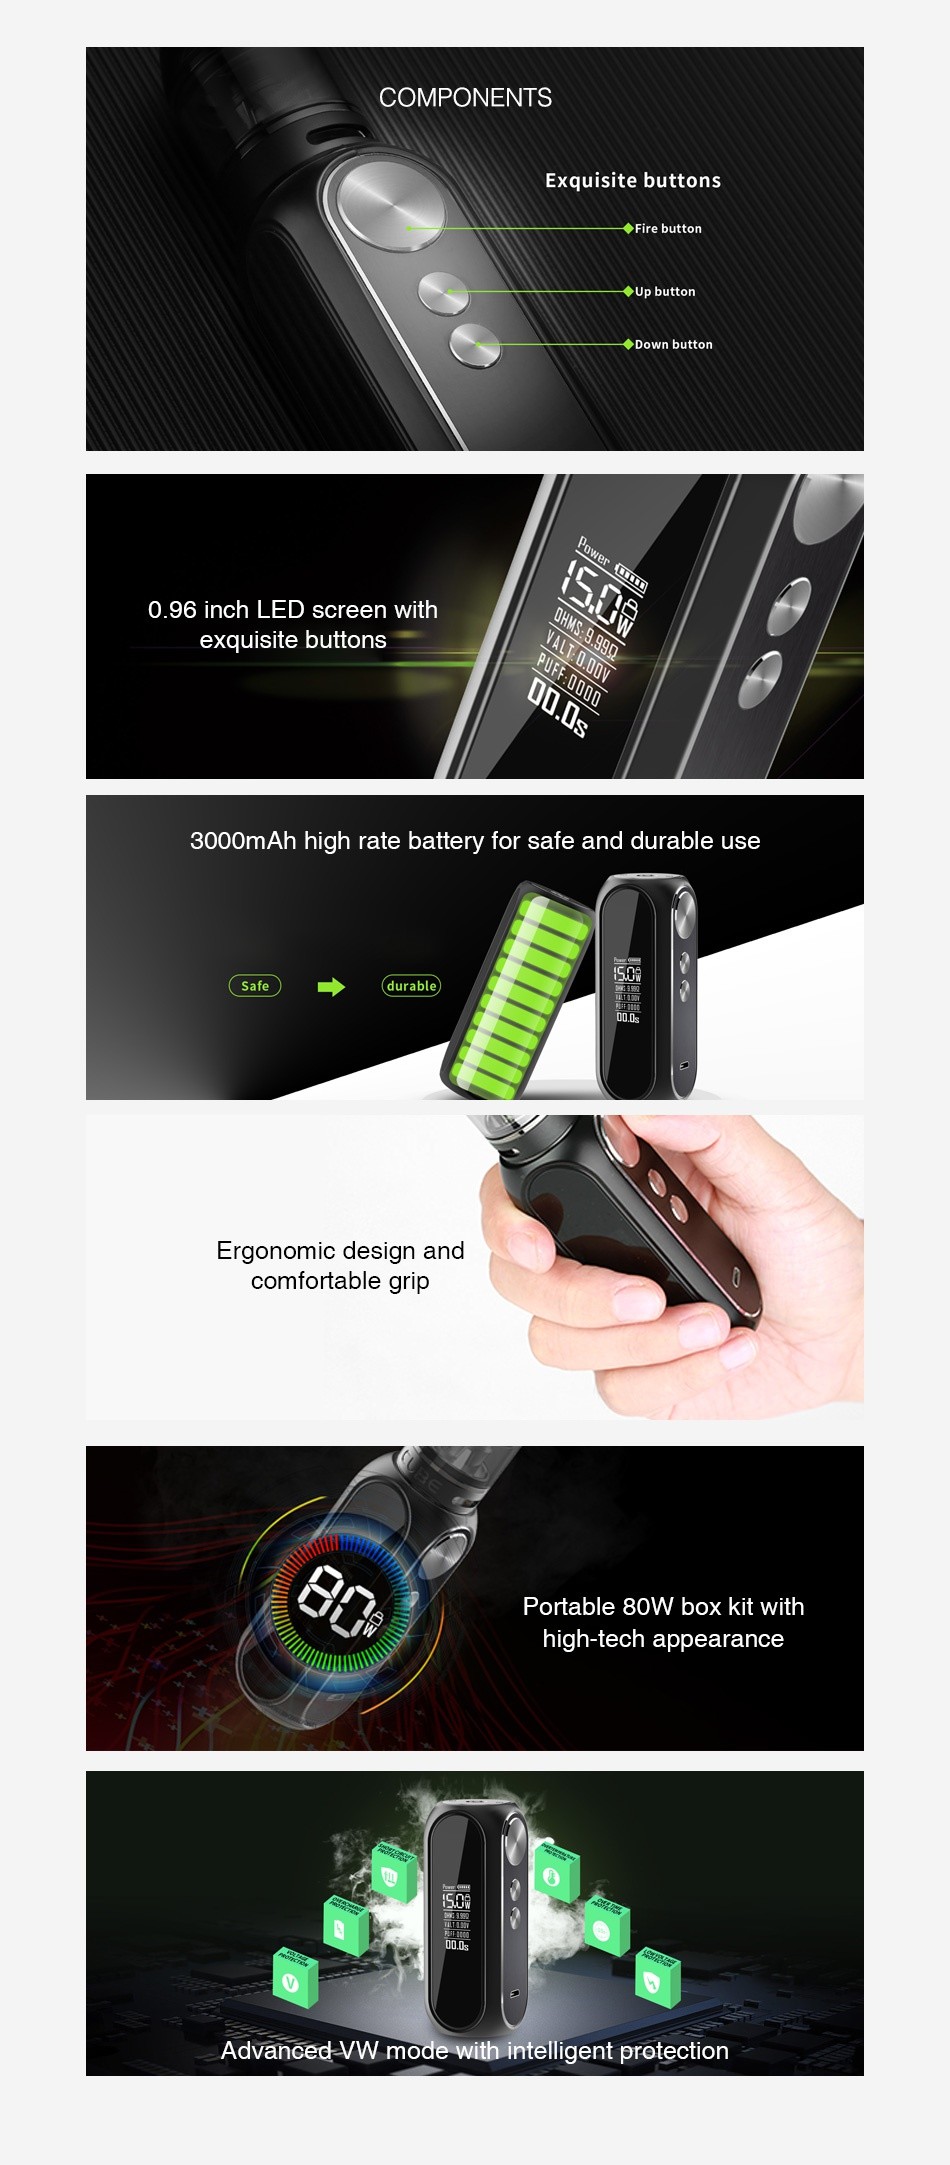 OBS Cube VW Box MOD 3000mAh COMPONENTS xquisite buttons  Fire but   Down button 0 96 inch lEd screen with exquisite buttons 3000mAh high rate battery for safe and durable use Ergonomic design and comfortable grip Portable 80w box kit with high tech appearance 0 Advanced VW mode with intelligent protection